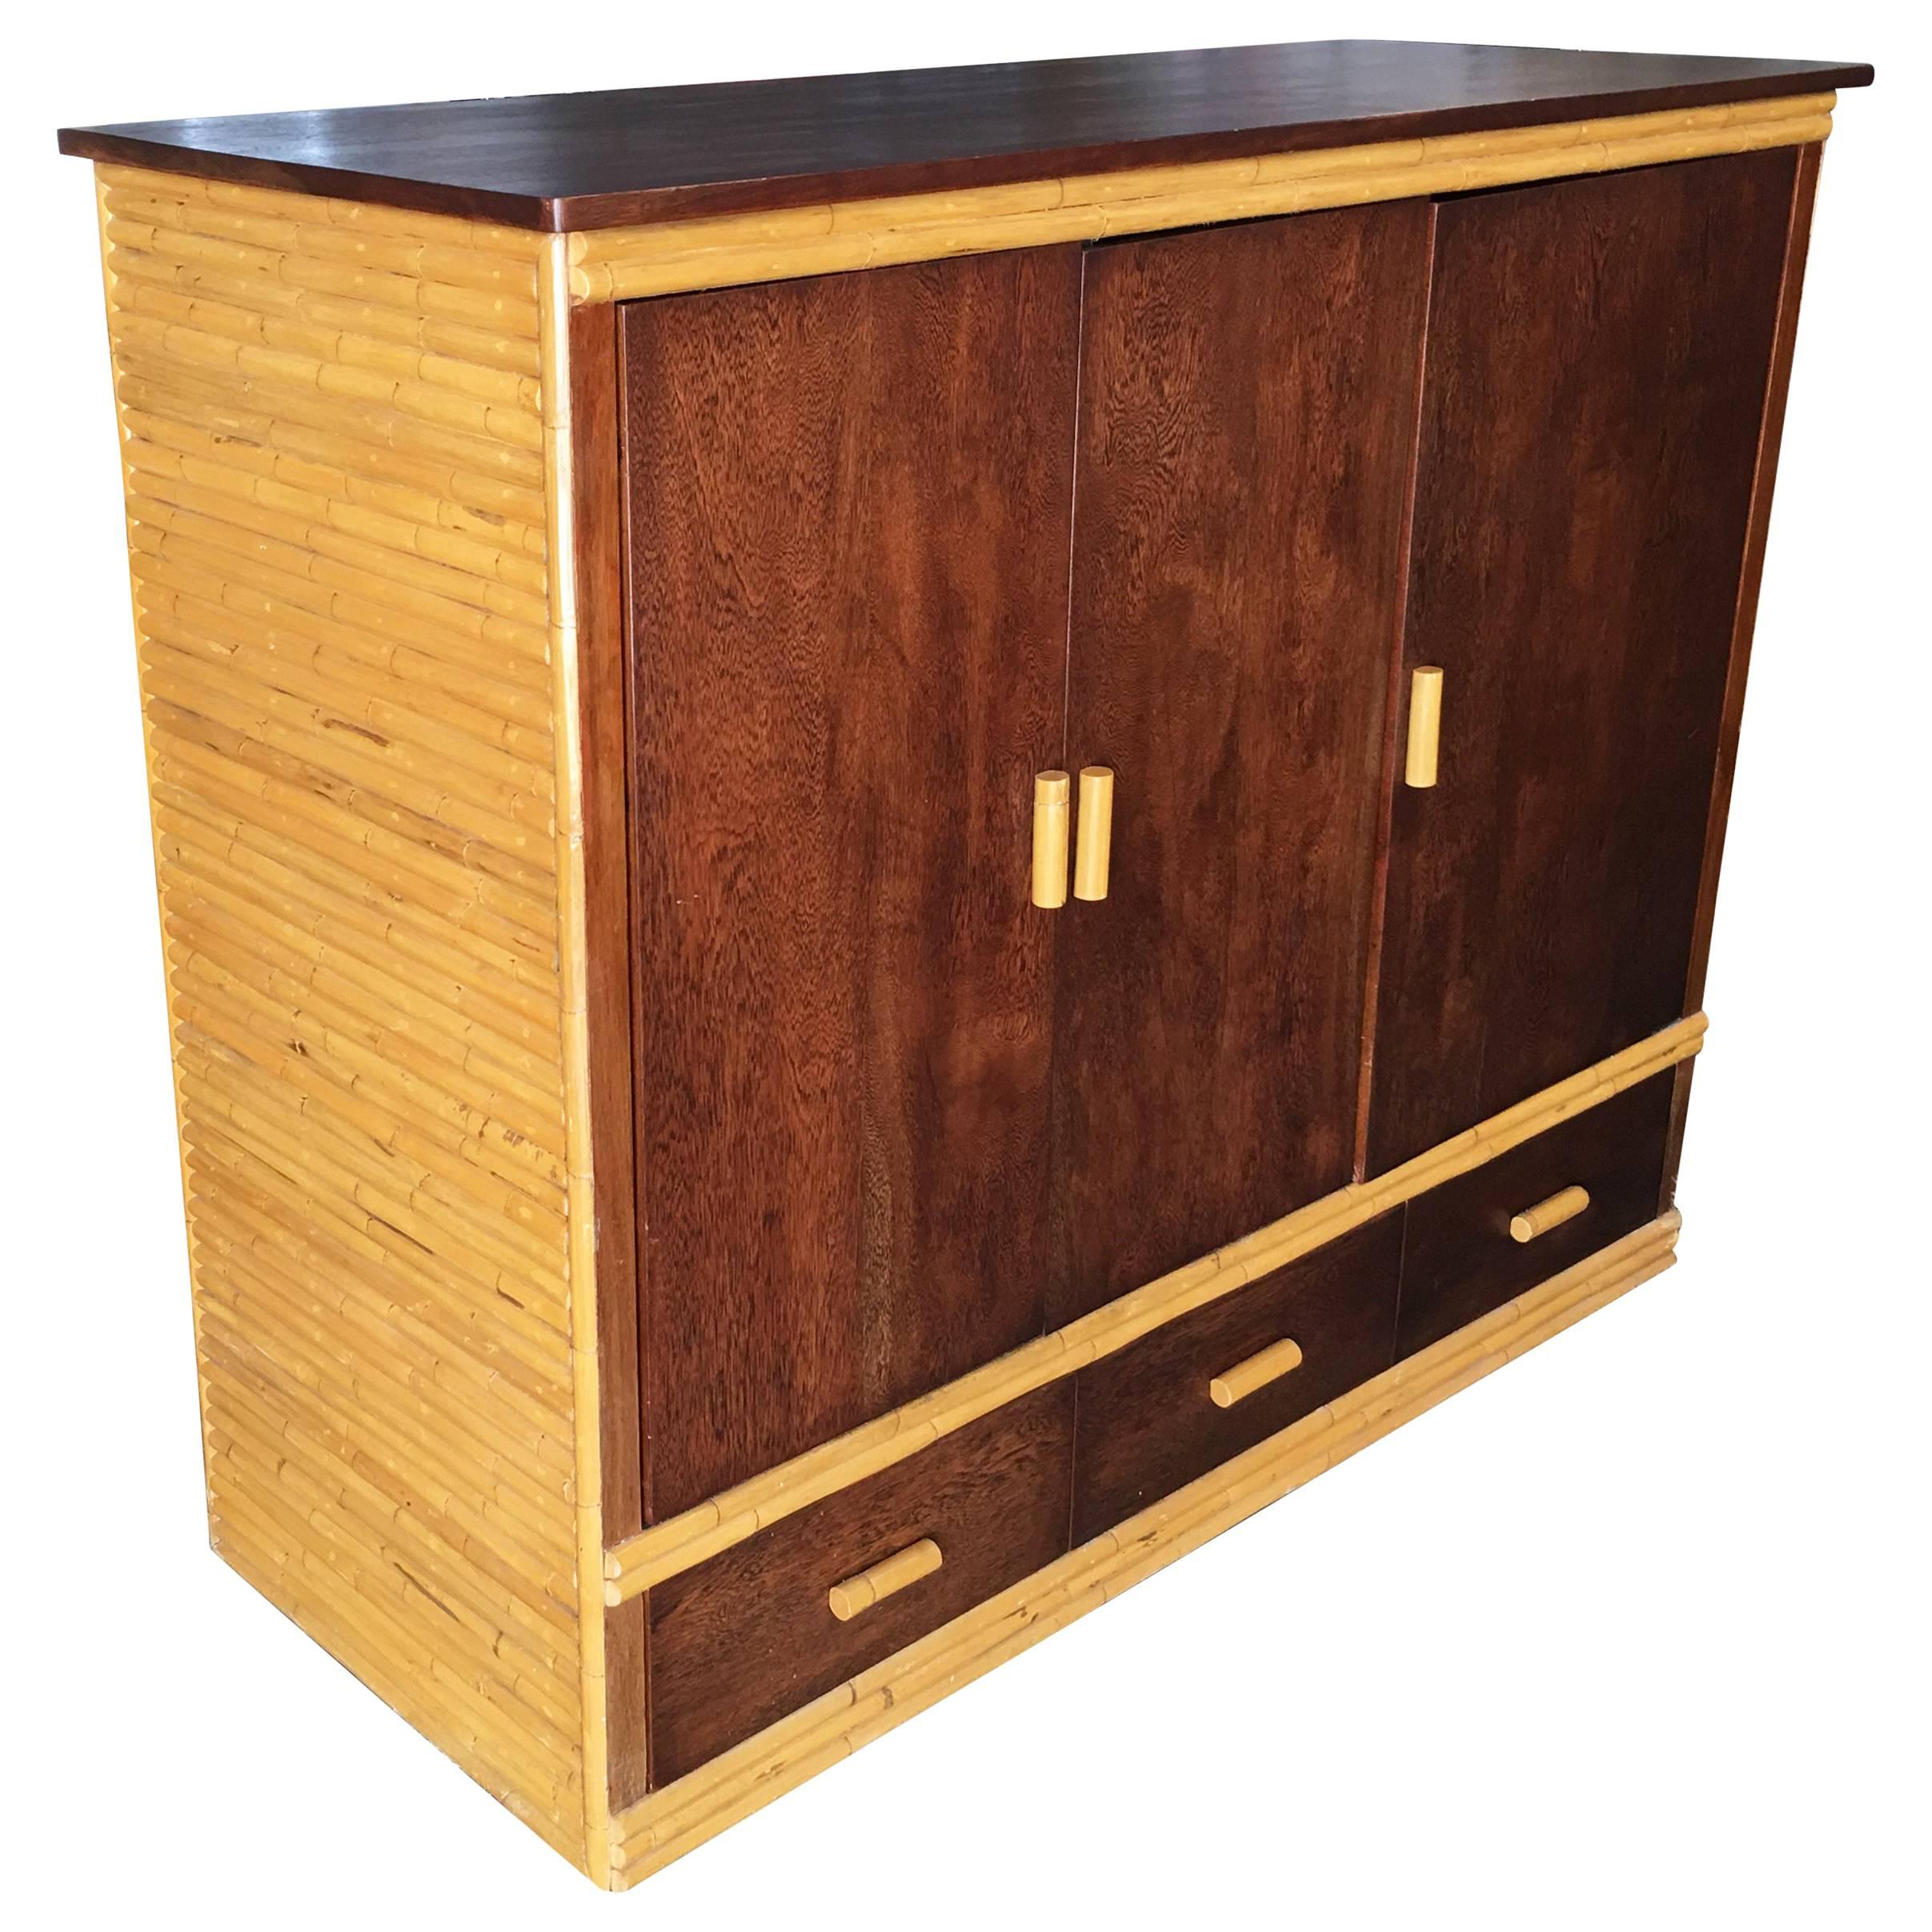 Rattan and Mahogany TV Cabinet with Component Rack or Bar